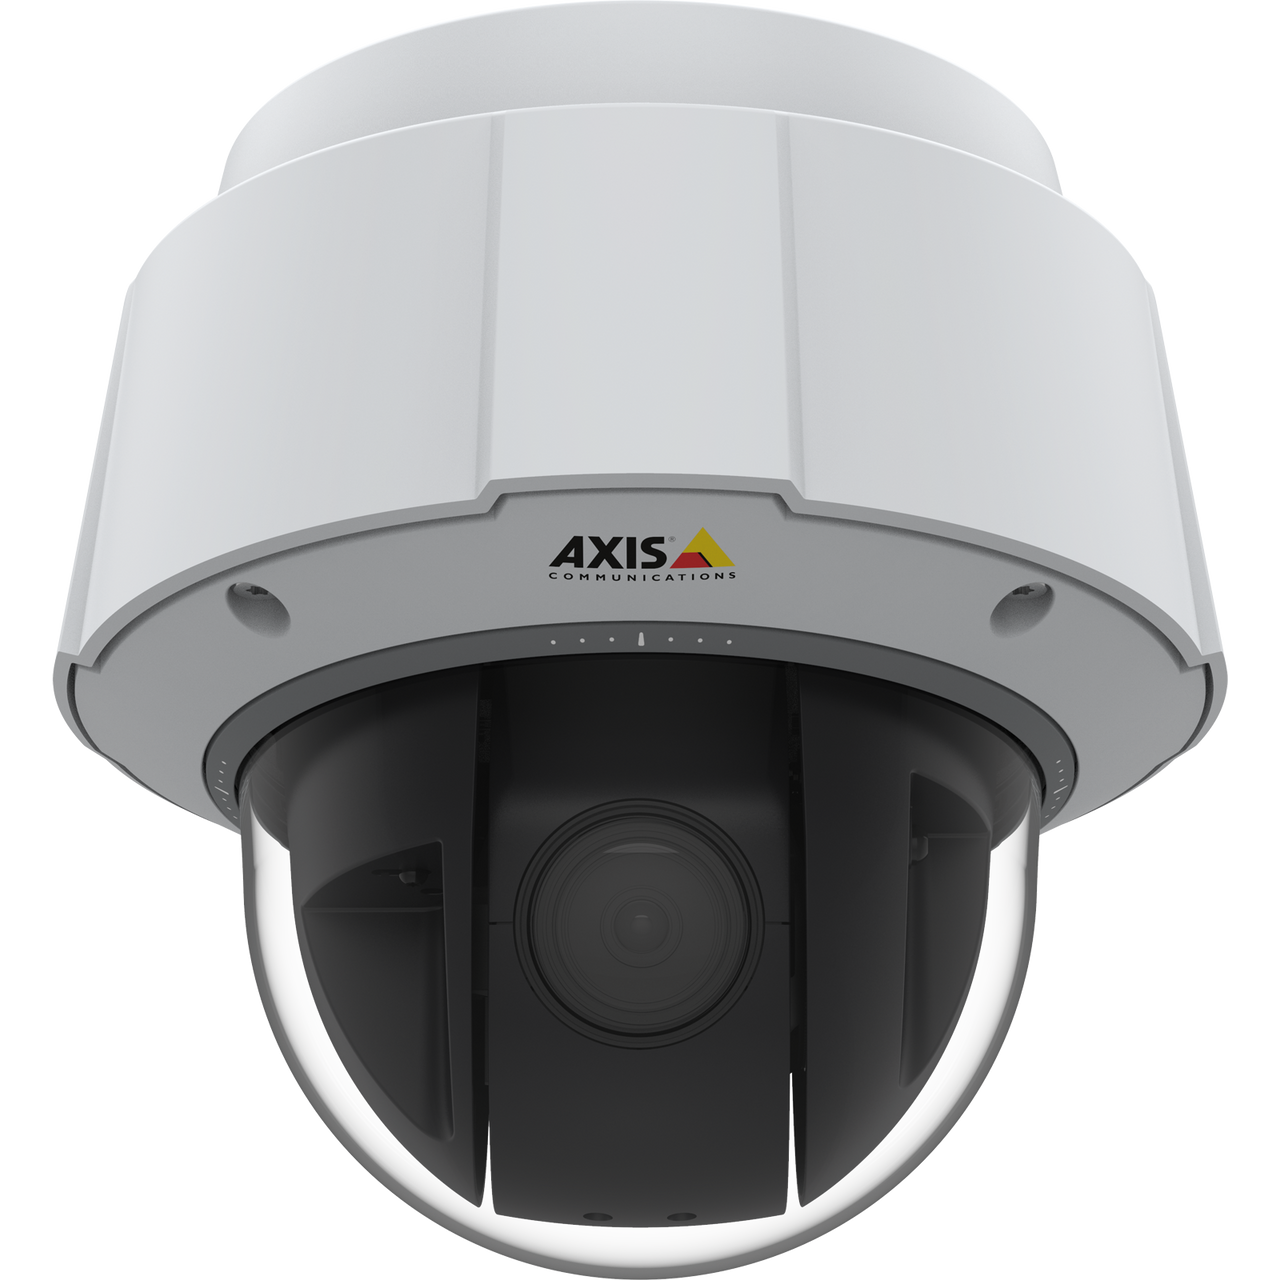 AXIS Q6074-E 60HZ Outdoor-ready PTZ with HDTV 720p and 30x optical zoom